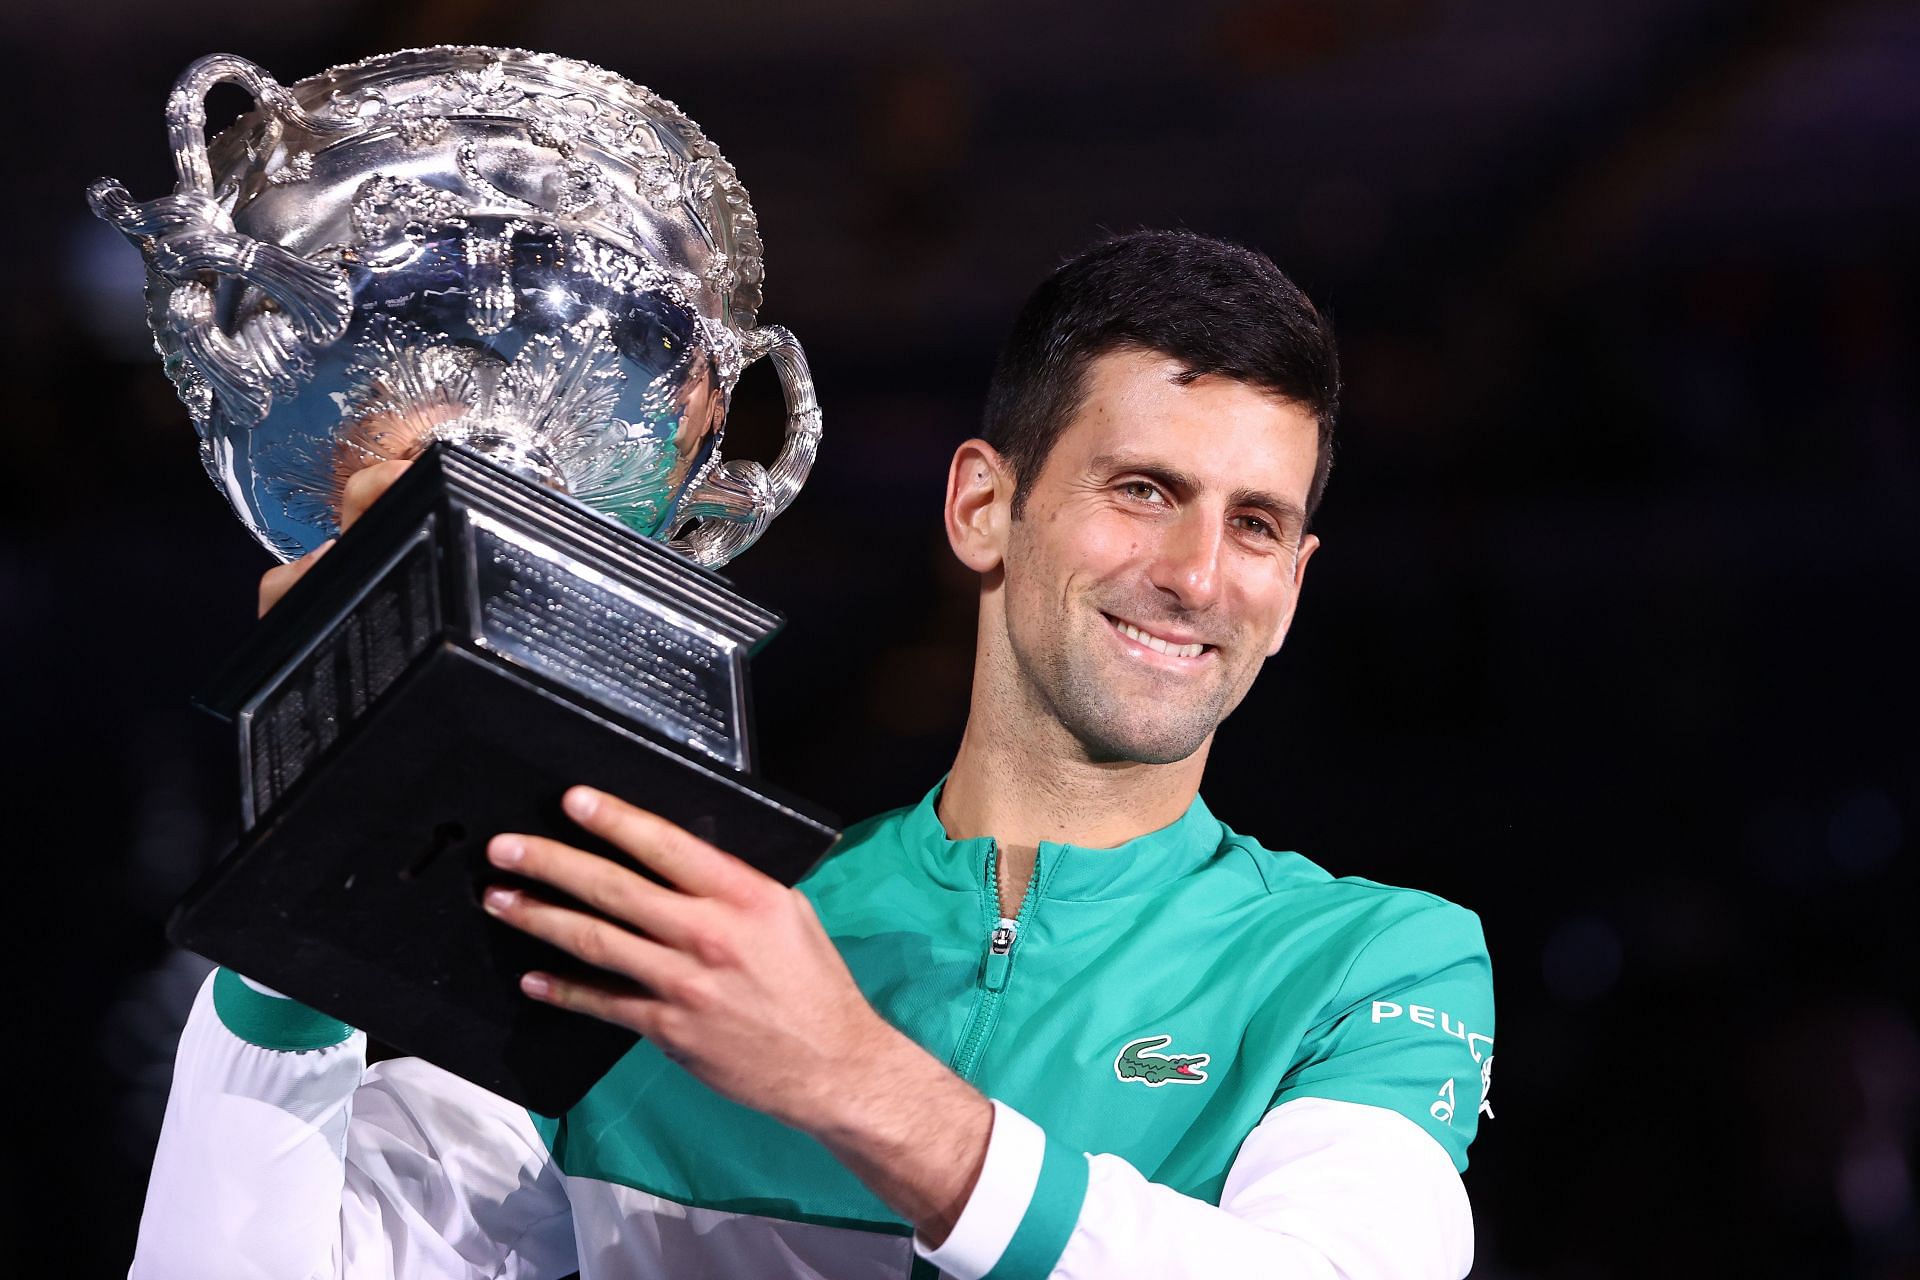 Whether Novak Djokovic can play at the 2022 Australian Open or not will be confirmed on Monday